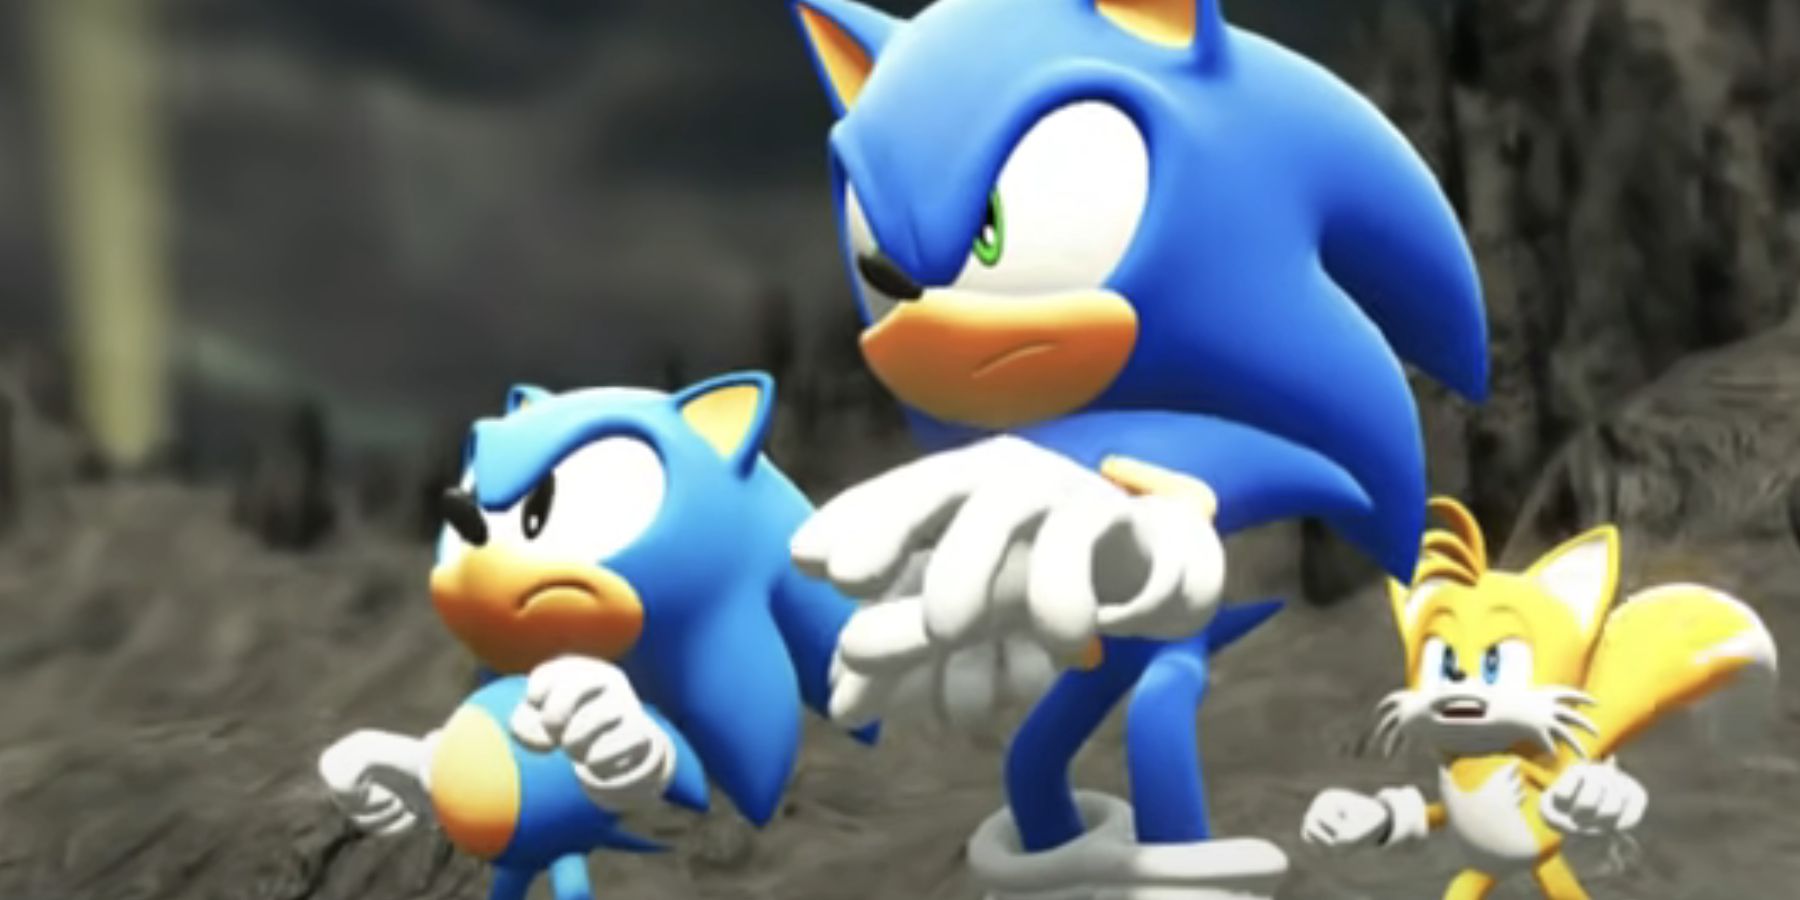 Sonic and Classic Sonic face an enemy with Tails in the background